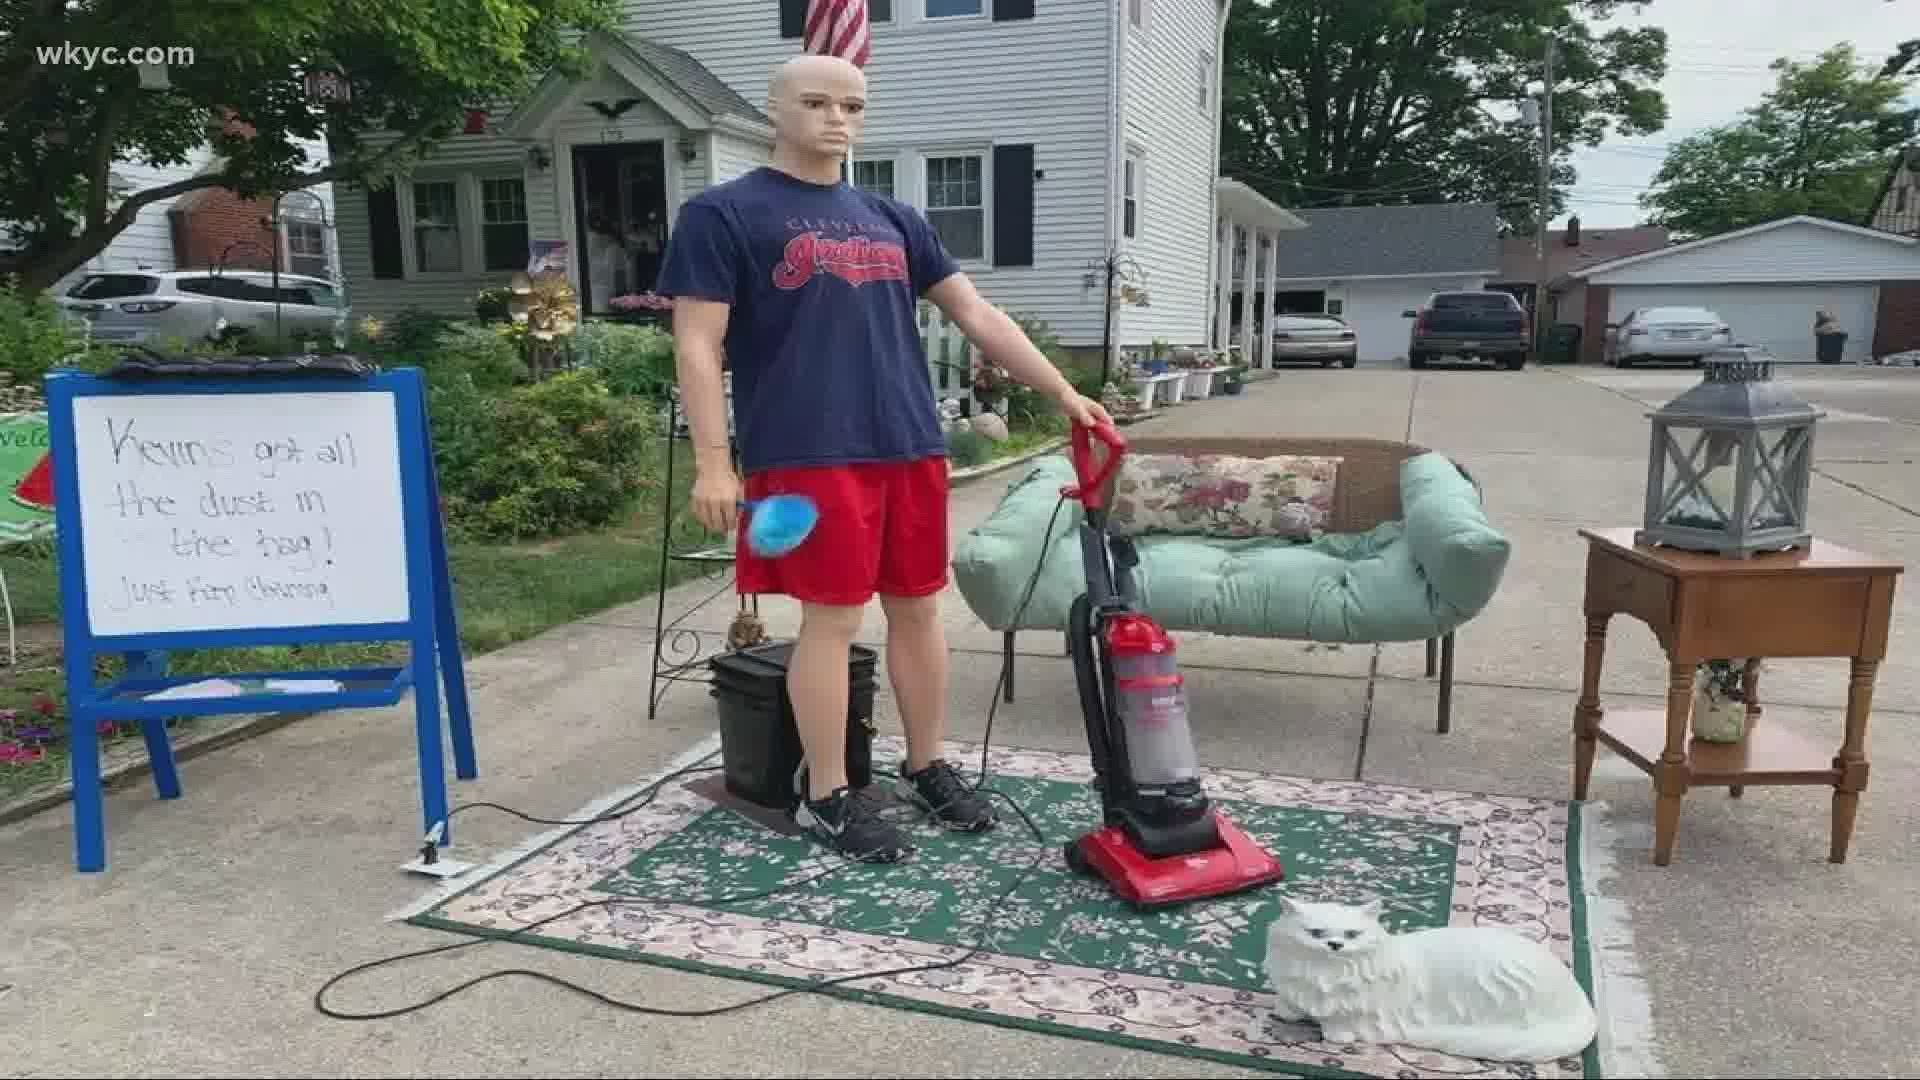 Meet Kevin. He's a mannequin that has been bringing joy to a Willowick neighborhood for months with a new routine each day.